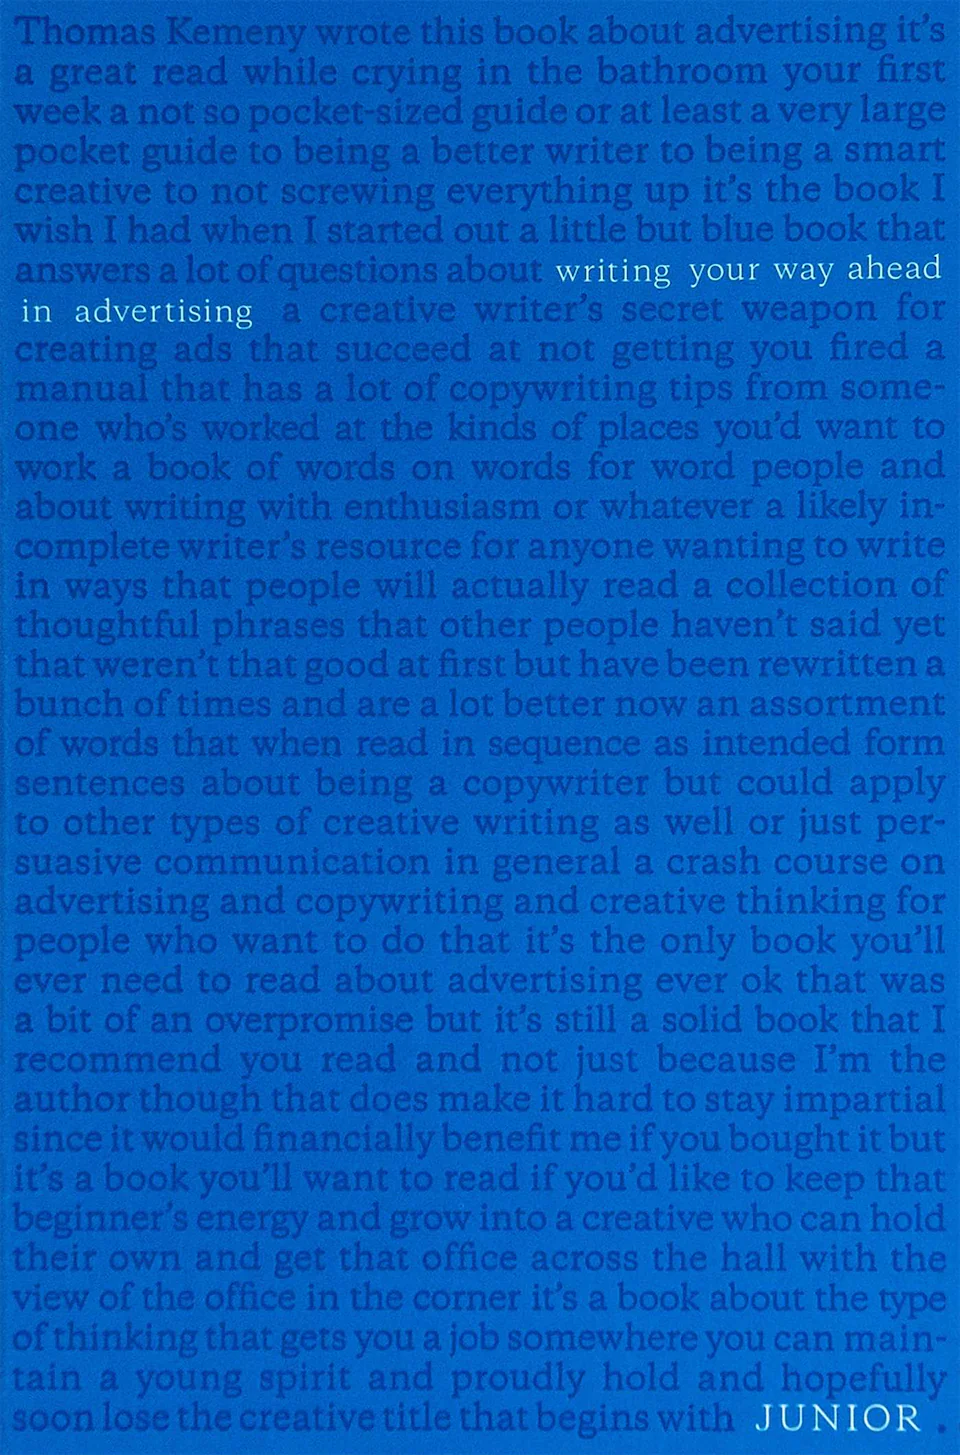 Junior: Writing Your Way Ahead in Advertising by Thomas Kemeny